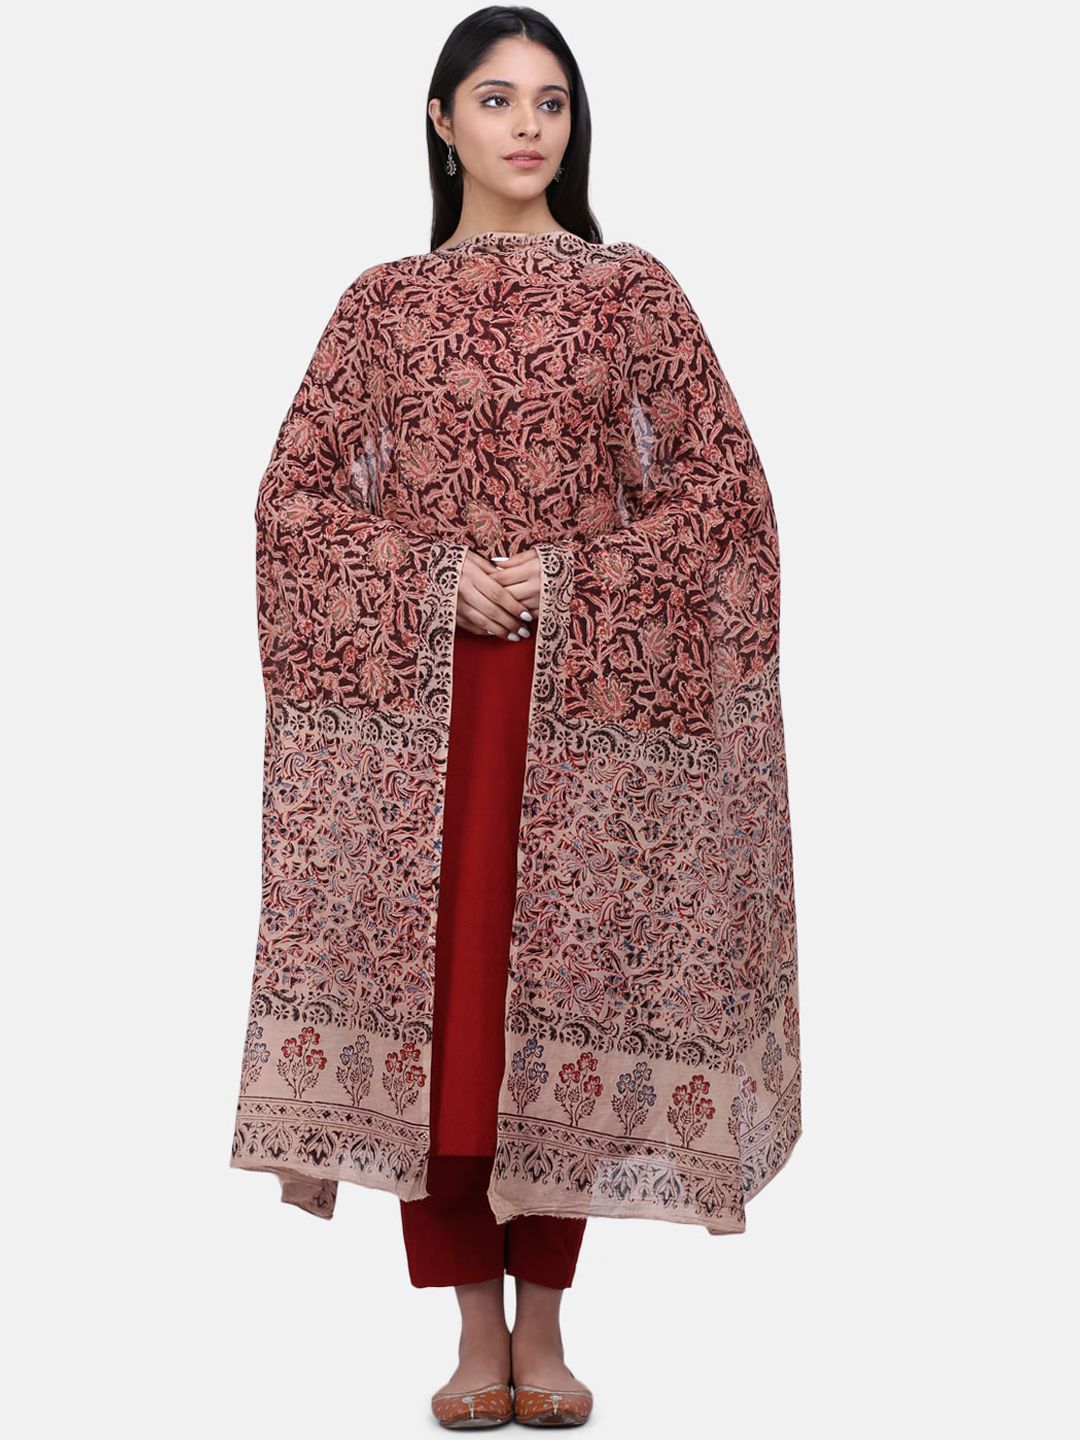 THE WEAVE TRAVELLER Brown & Red Printed Sustainable Dupatta Price in India